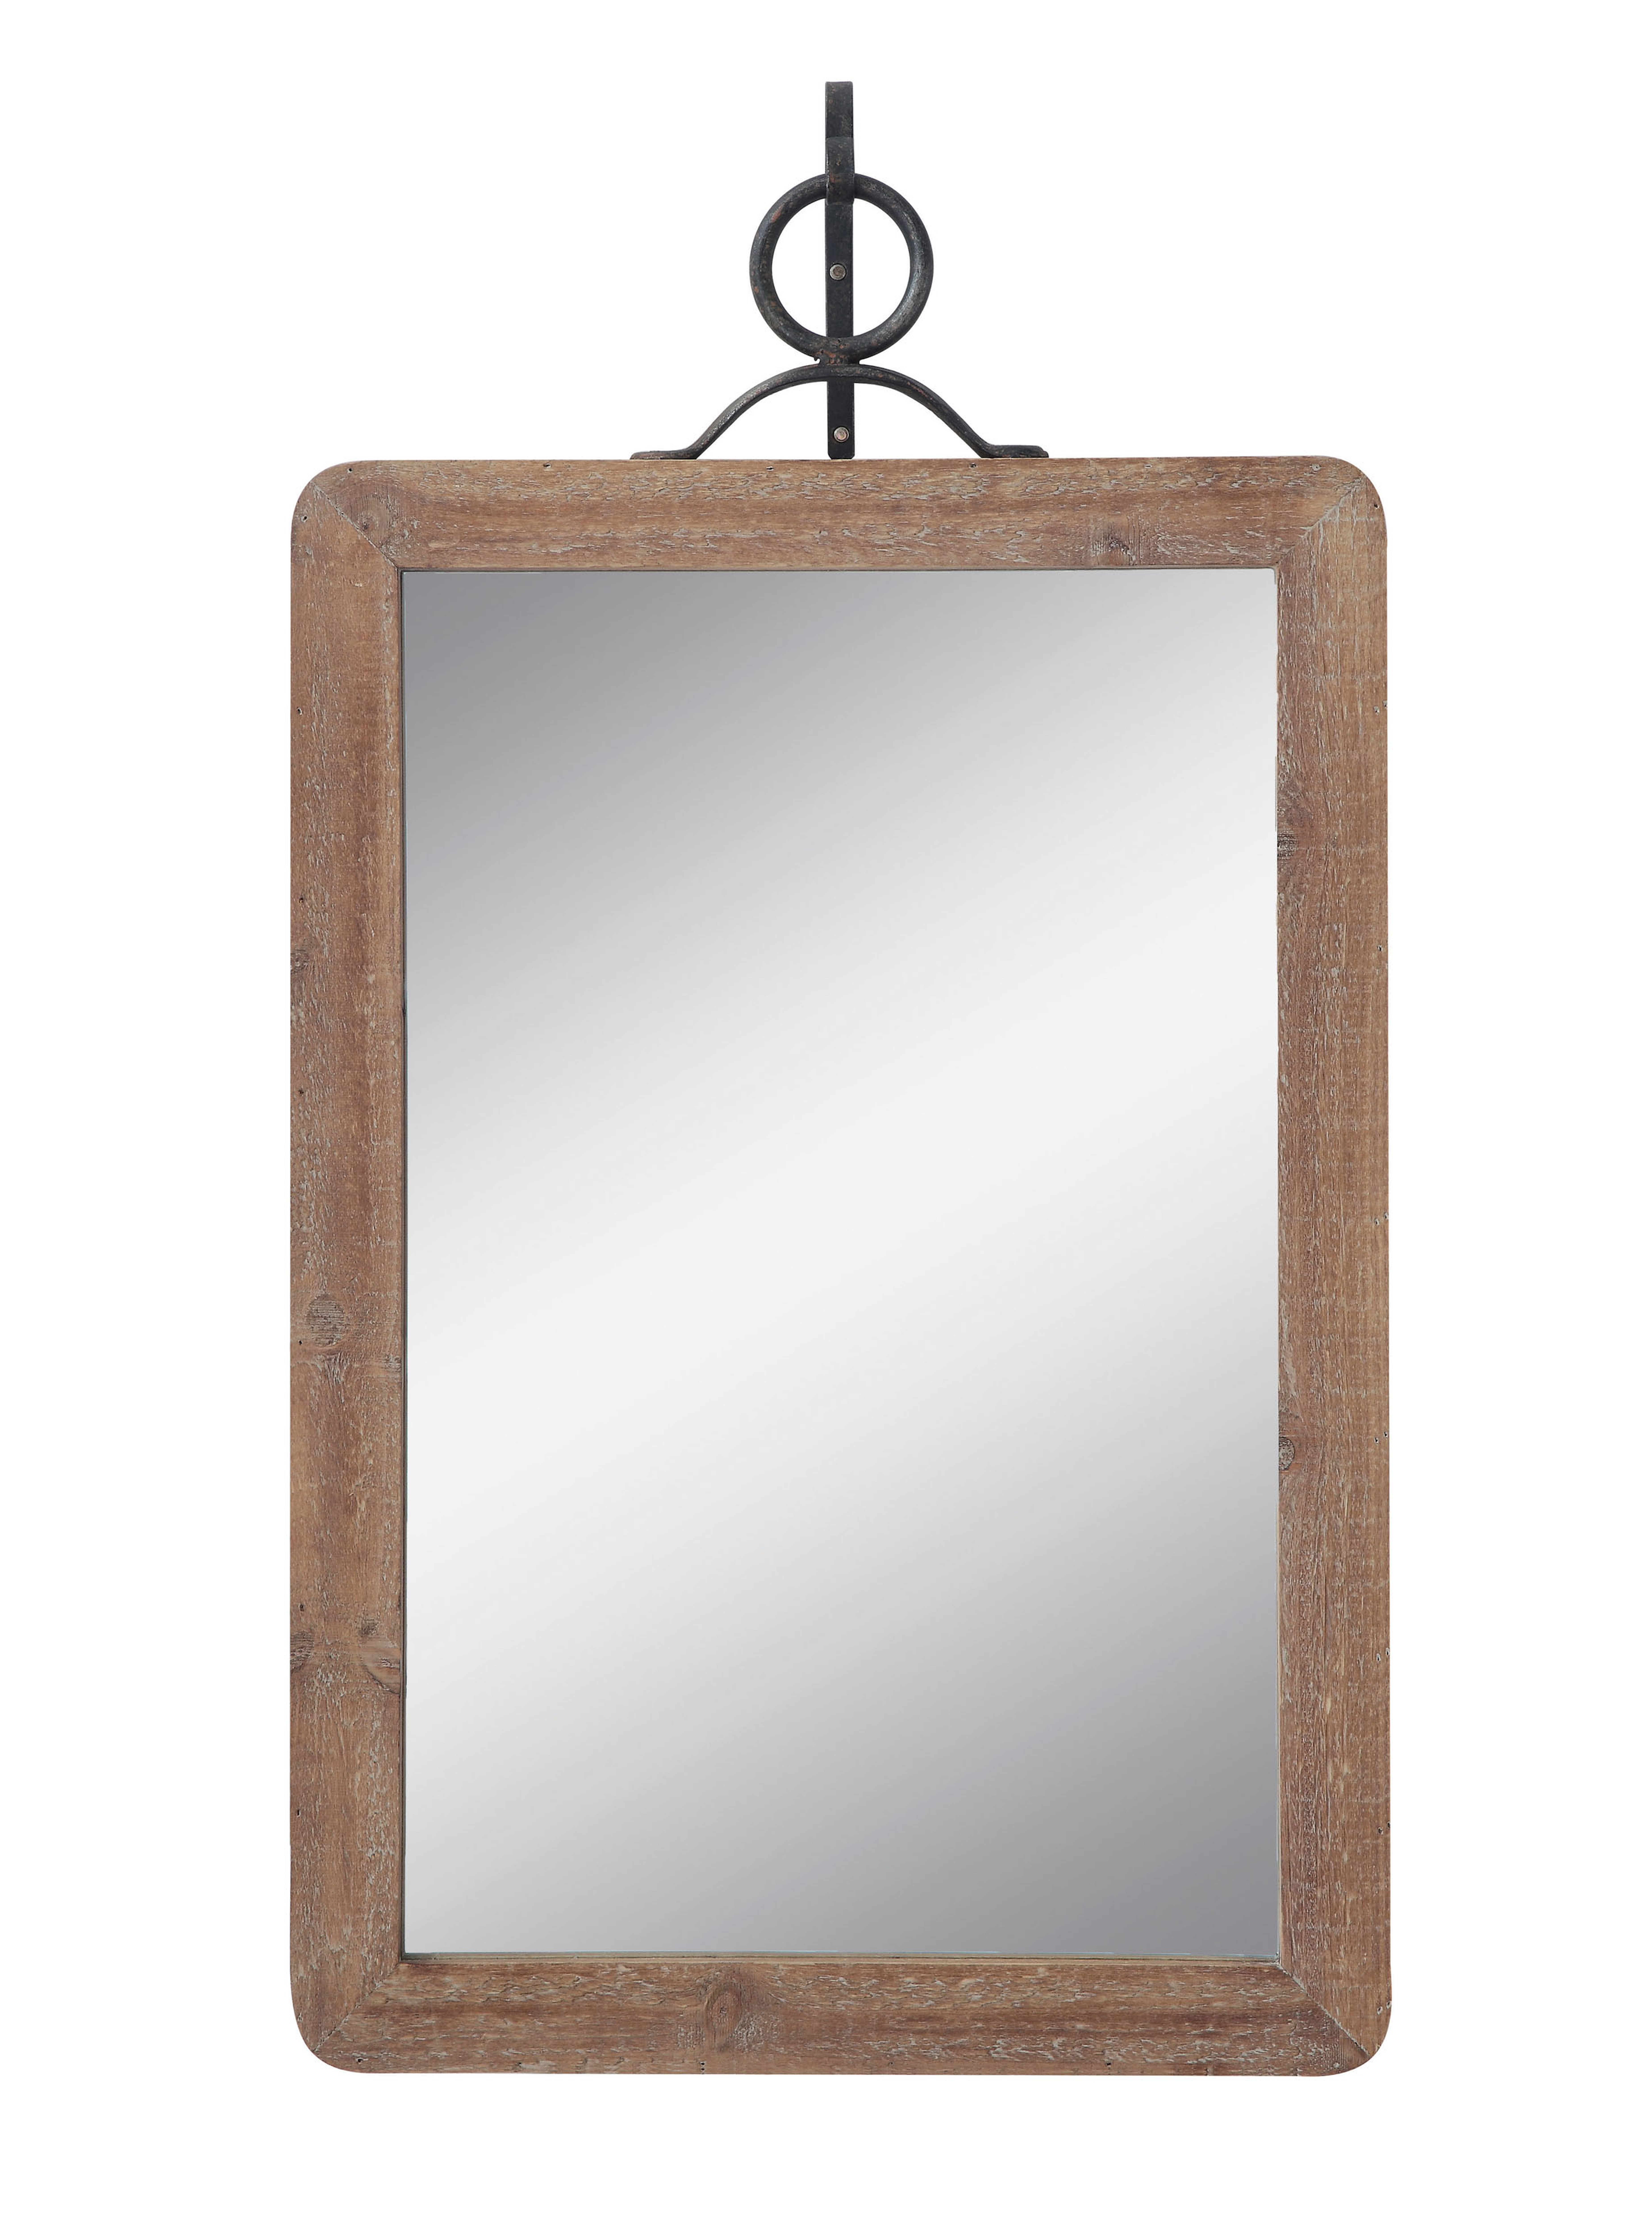 Large Wood Framed Rectangle Wall Mirror with Black Metal Hanging Bracket (Set of 2 Pieces) - Nomad Home